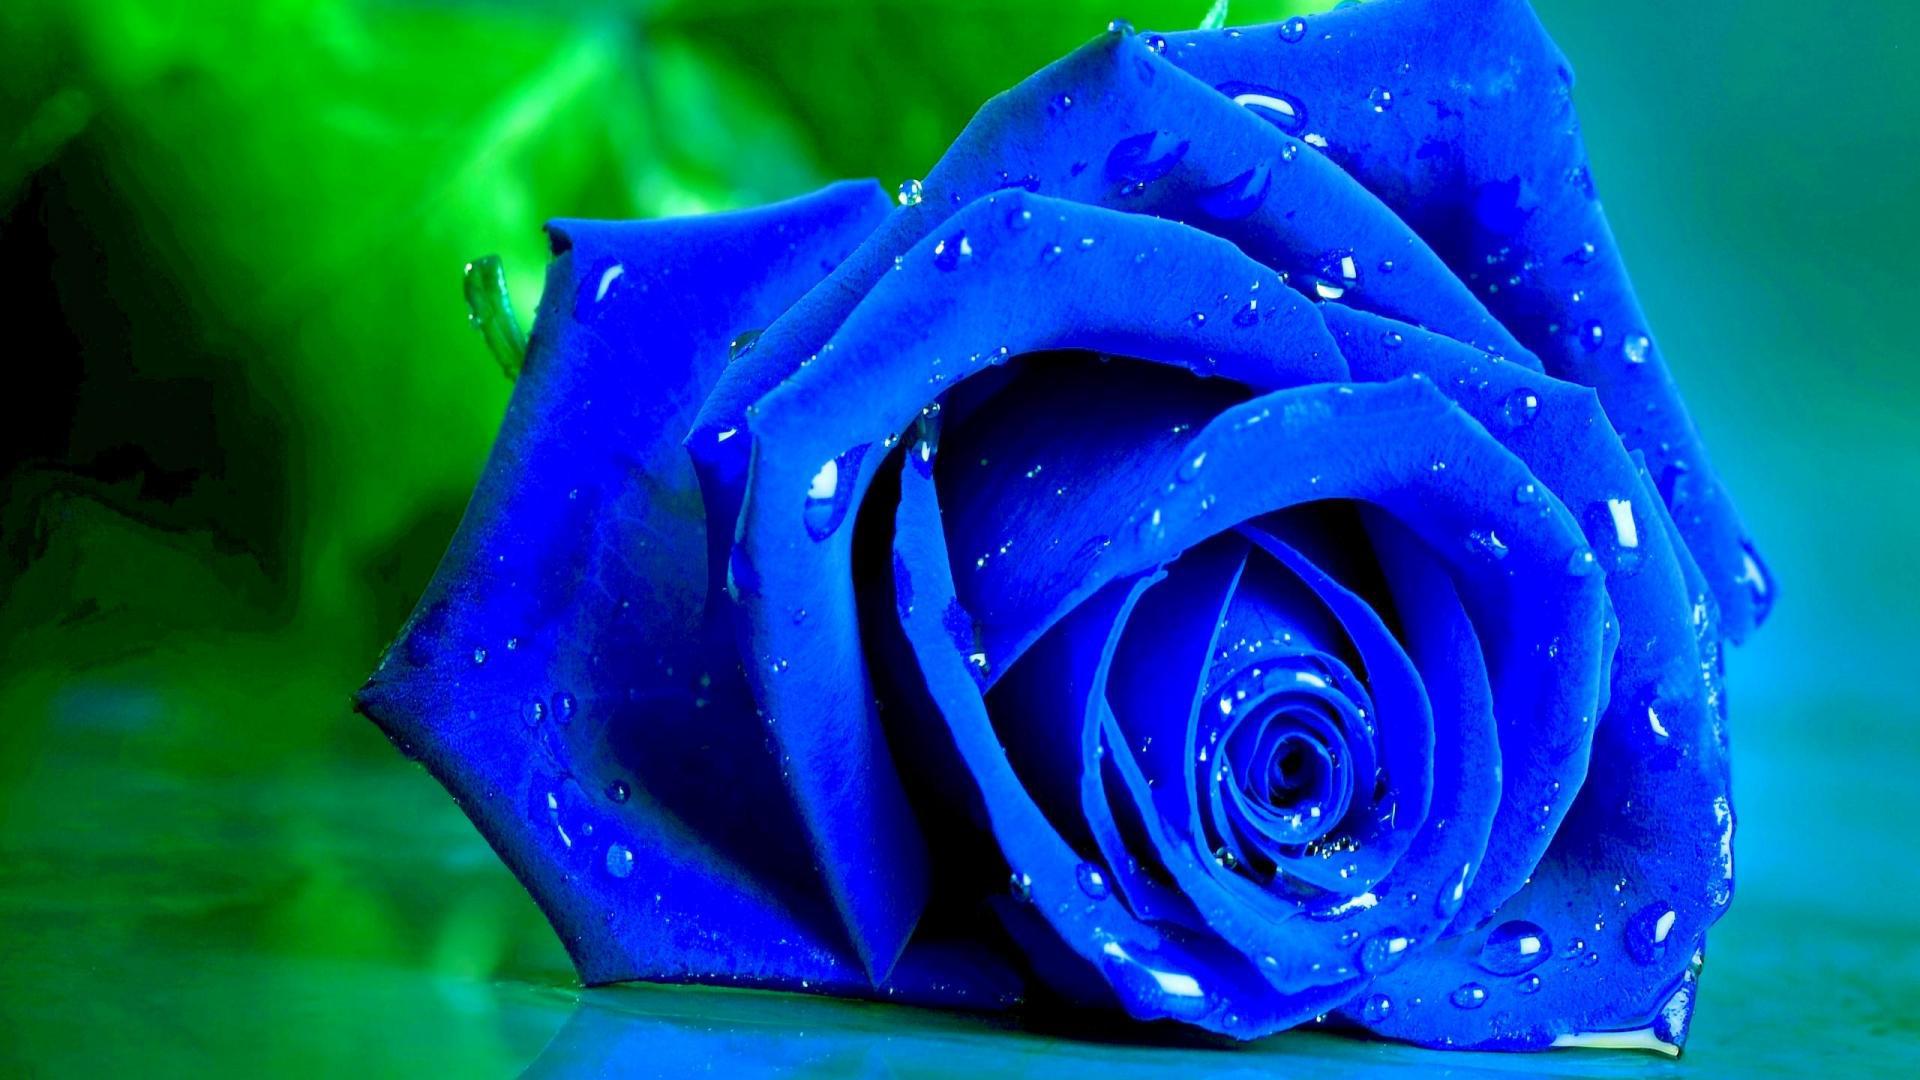 Download 1920x1080 Wallpaper Blue Rose Flower, Water Drops, Full Hd, Hdtv,  Fhd, 1080p, 1920x1080 Hd Image, Background, 5960